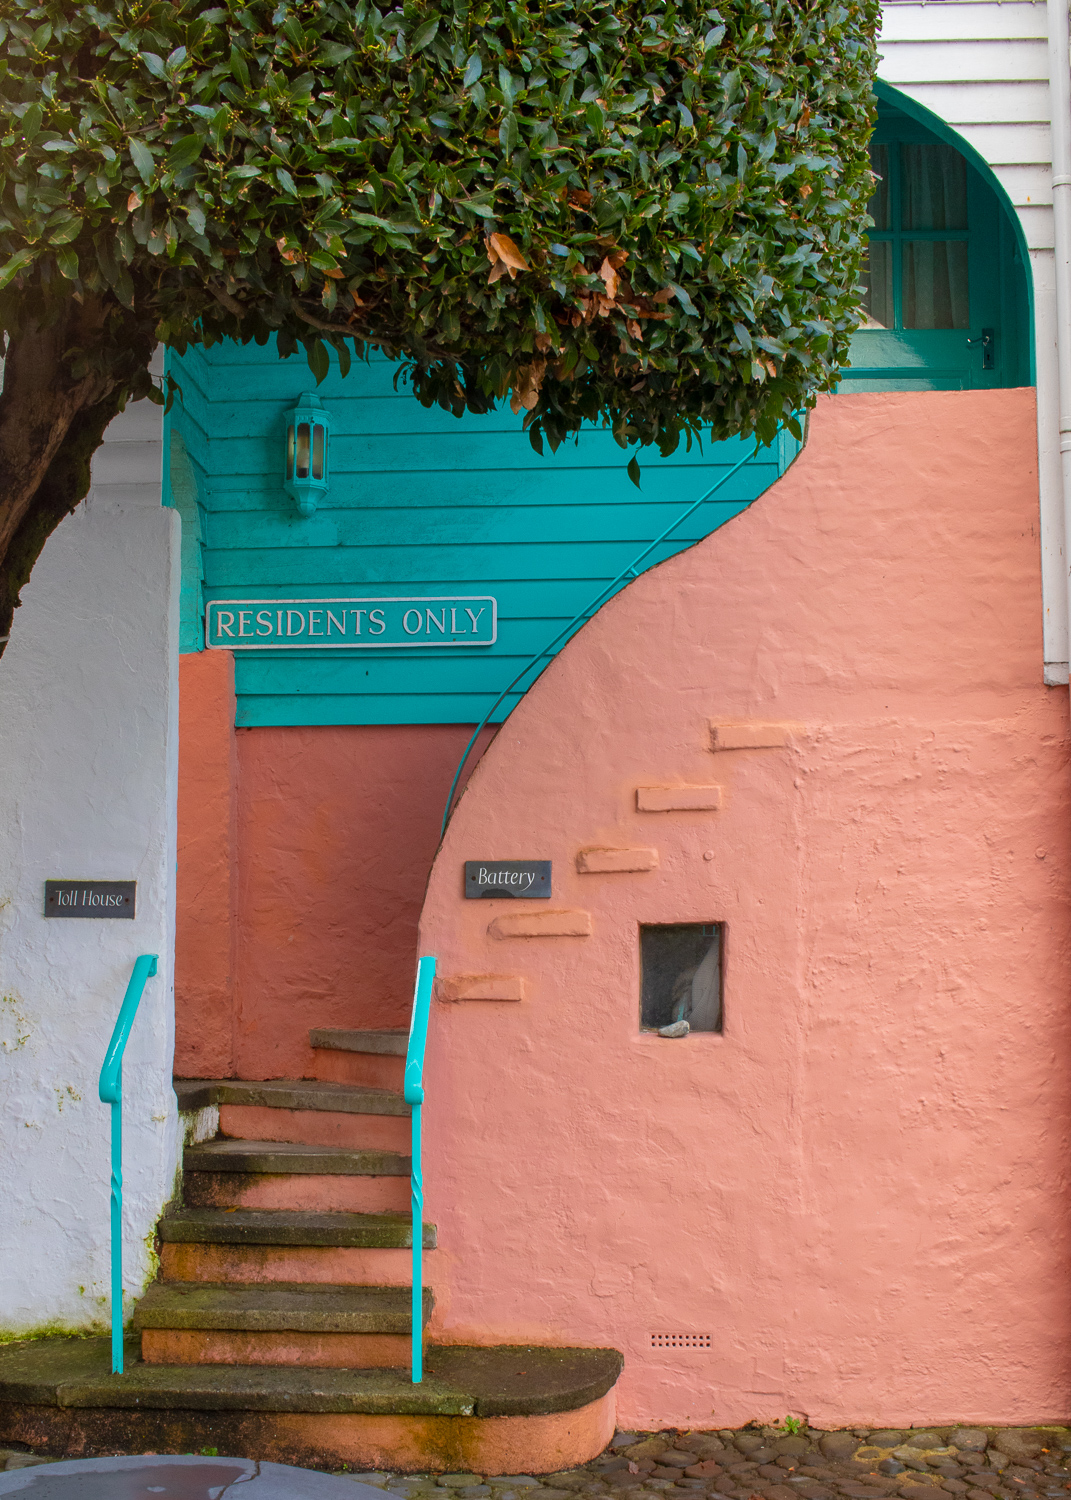 Portmeirion village in north wales